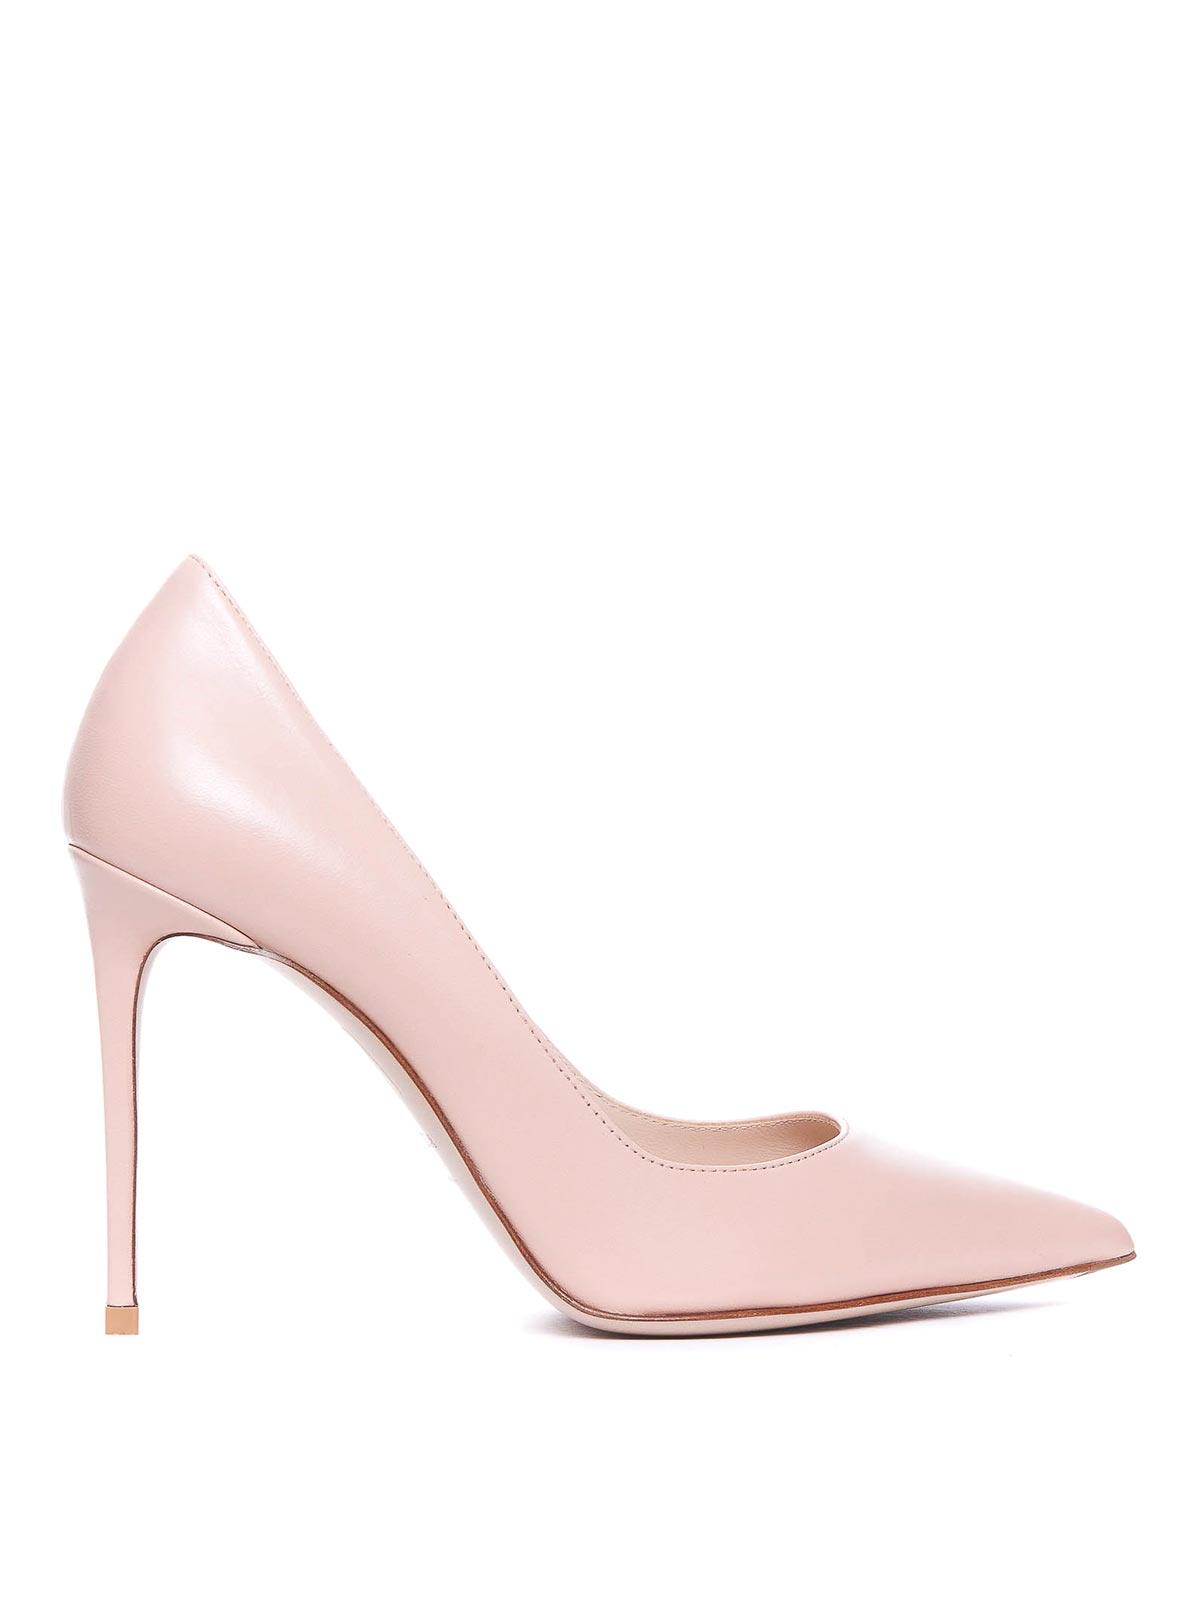 Shop Le Silla Leather Pumps In Nude & Neutrals